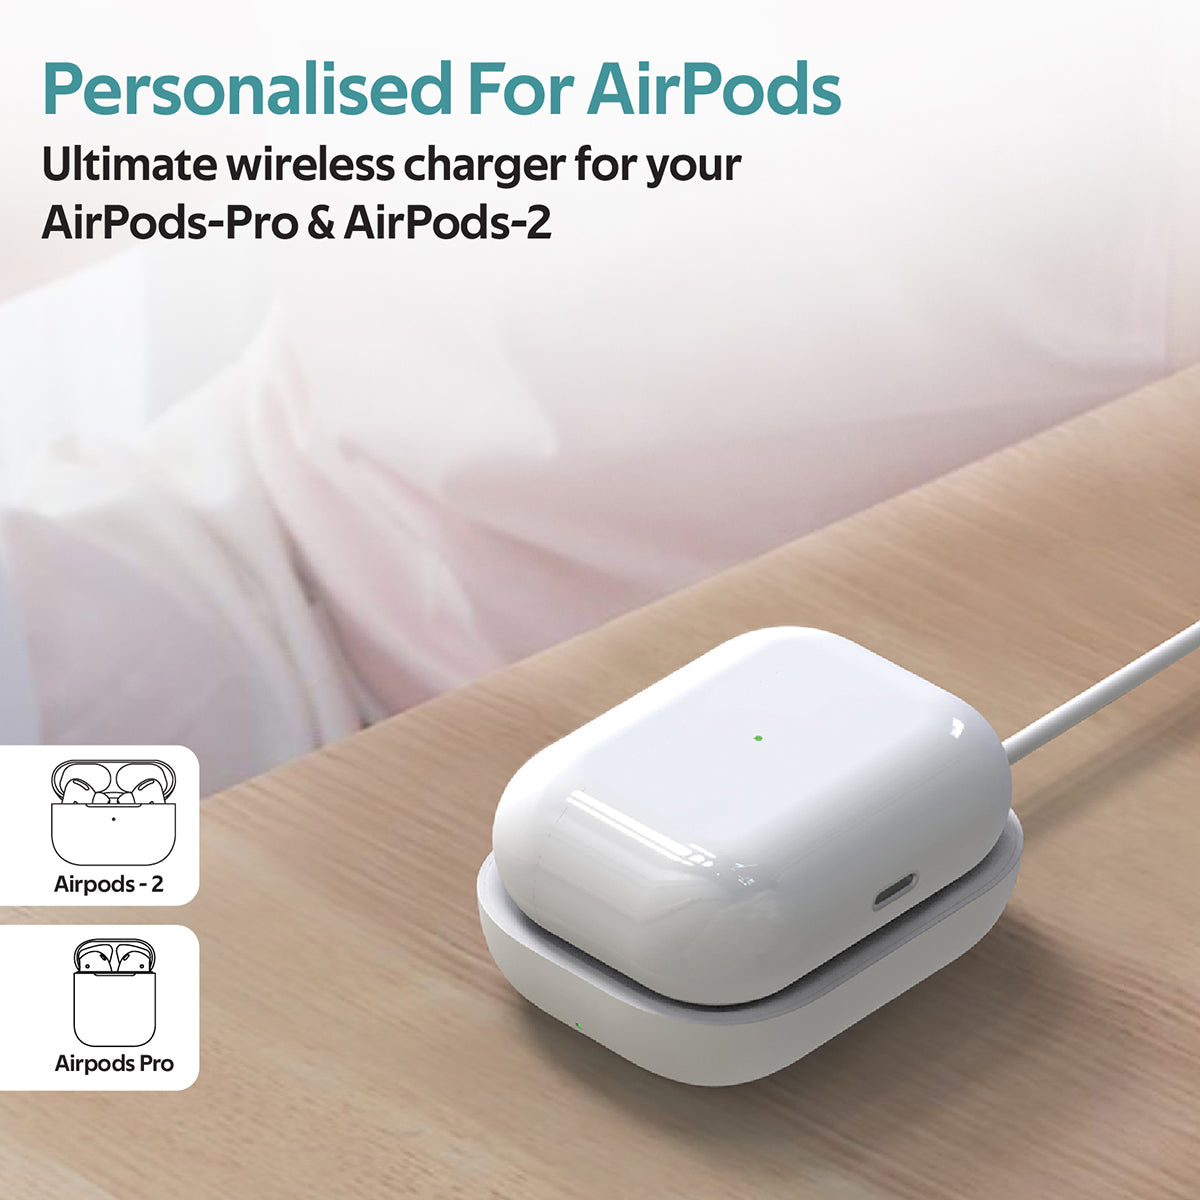 Promate - Wireless Charger for AirPods, Powerful 5W Wireless Charging Dock with Anti-Slip Surface Design and Over-Charging Protection for AirPods and AirPods Pro, AuraPod-1 White